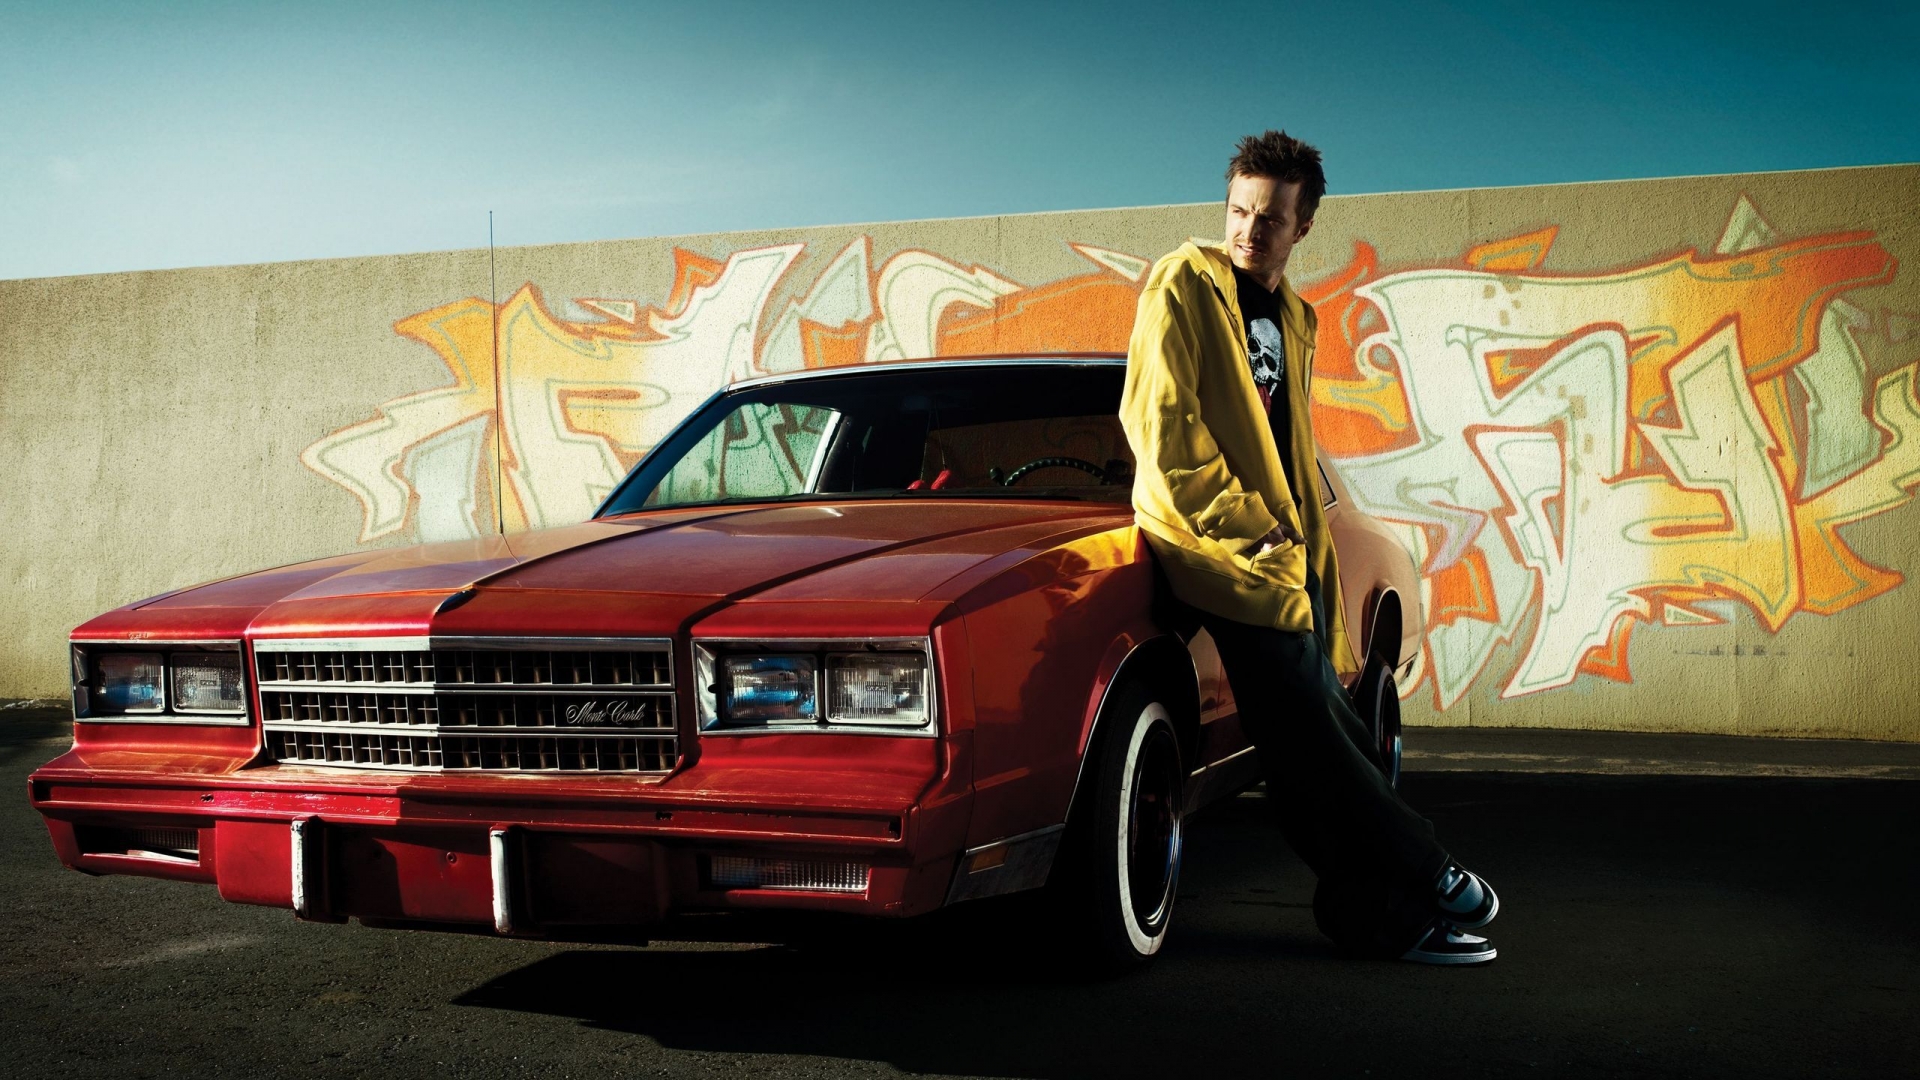 Aaron Paul for 1920 x 1080 HDTV 1080p resolution